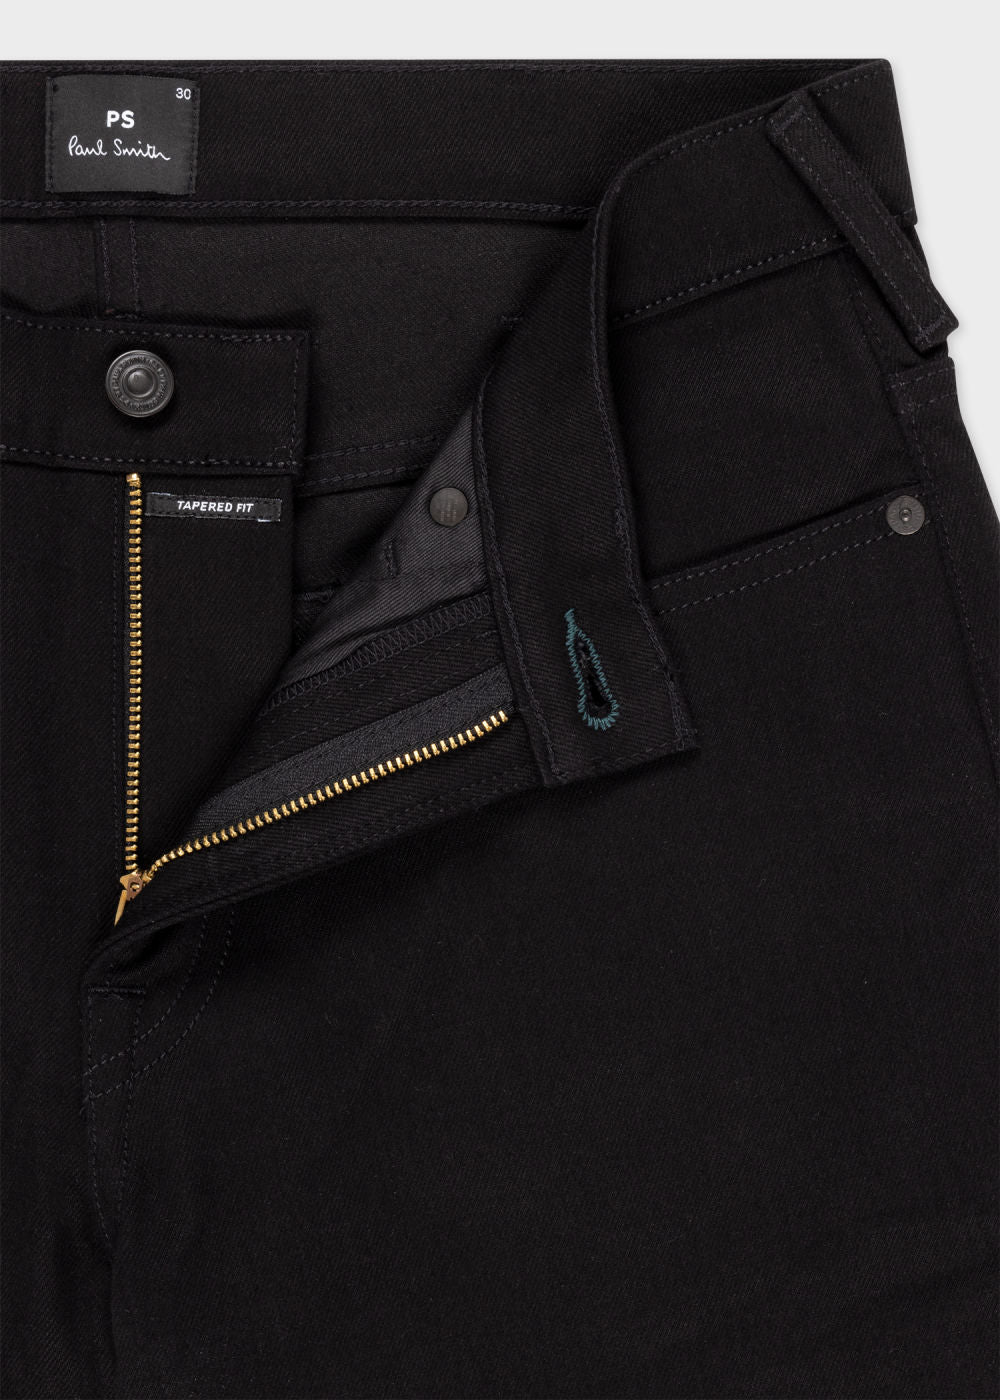 Paul Smith Black Tapered Jeans